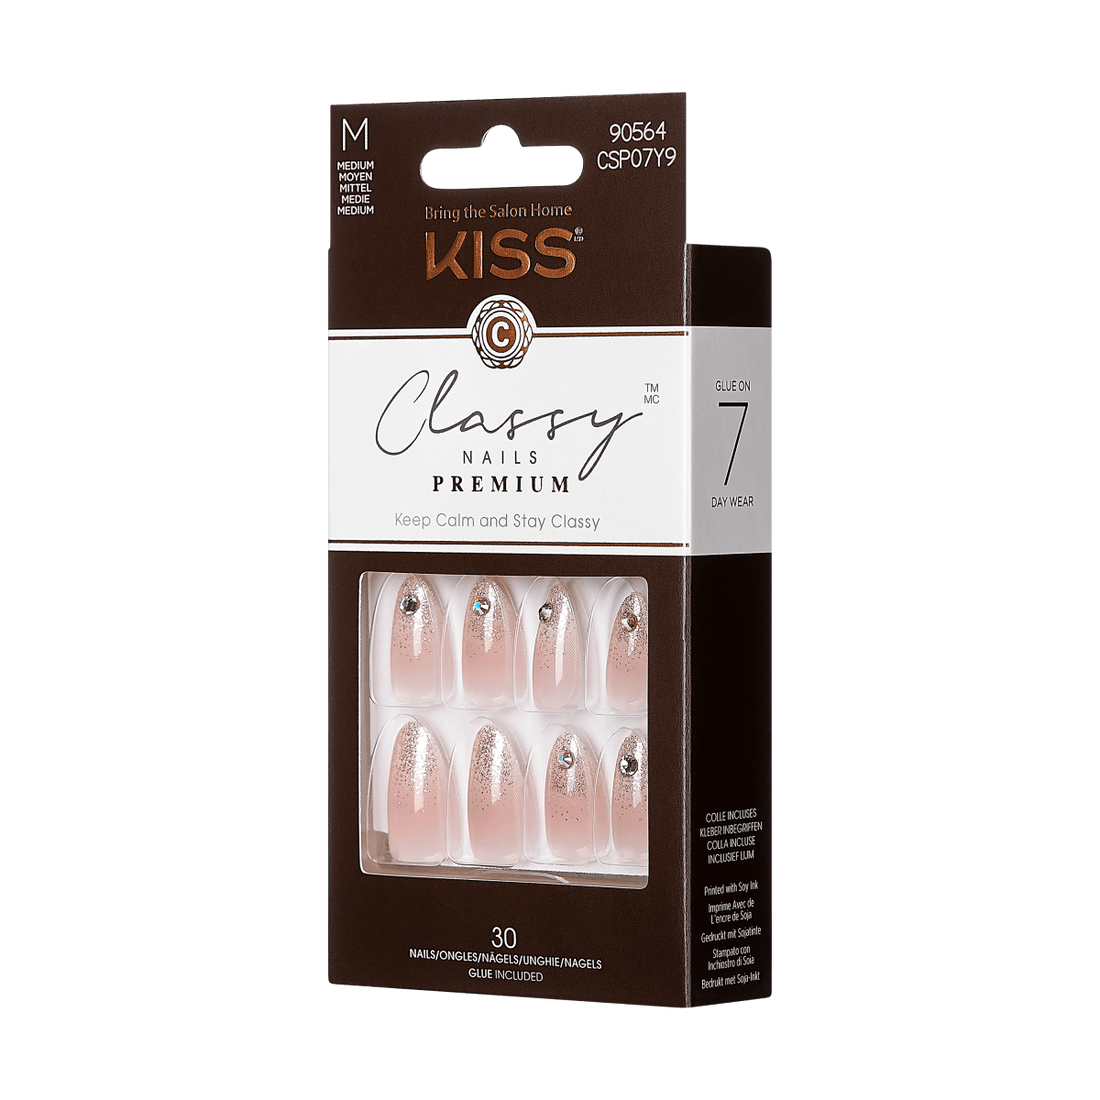 KISS Classy Nails Premium, Press-On Nails, Ever After, Beige, Med Almond, 30ct